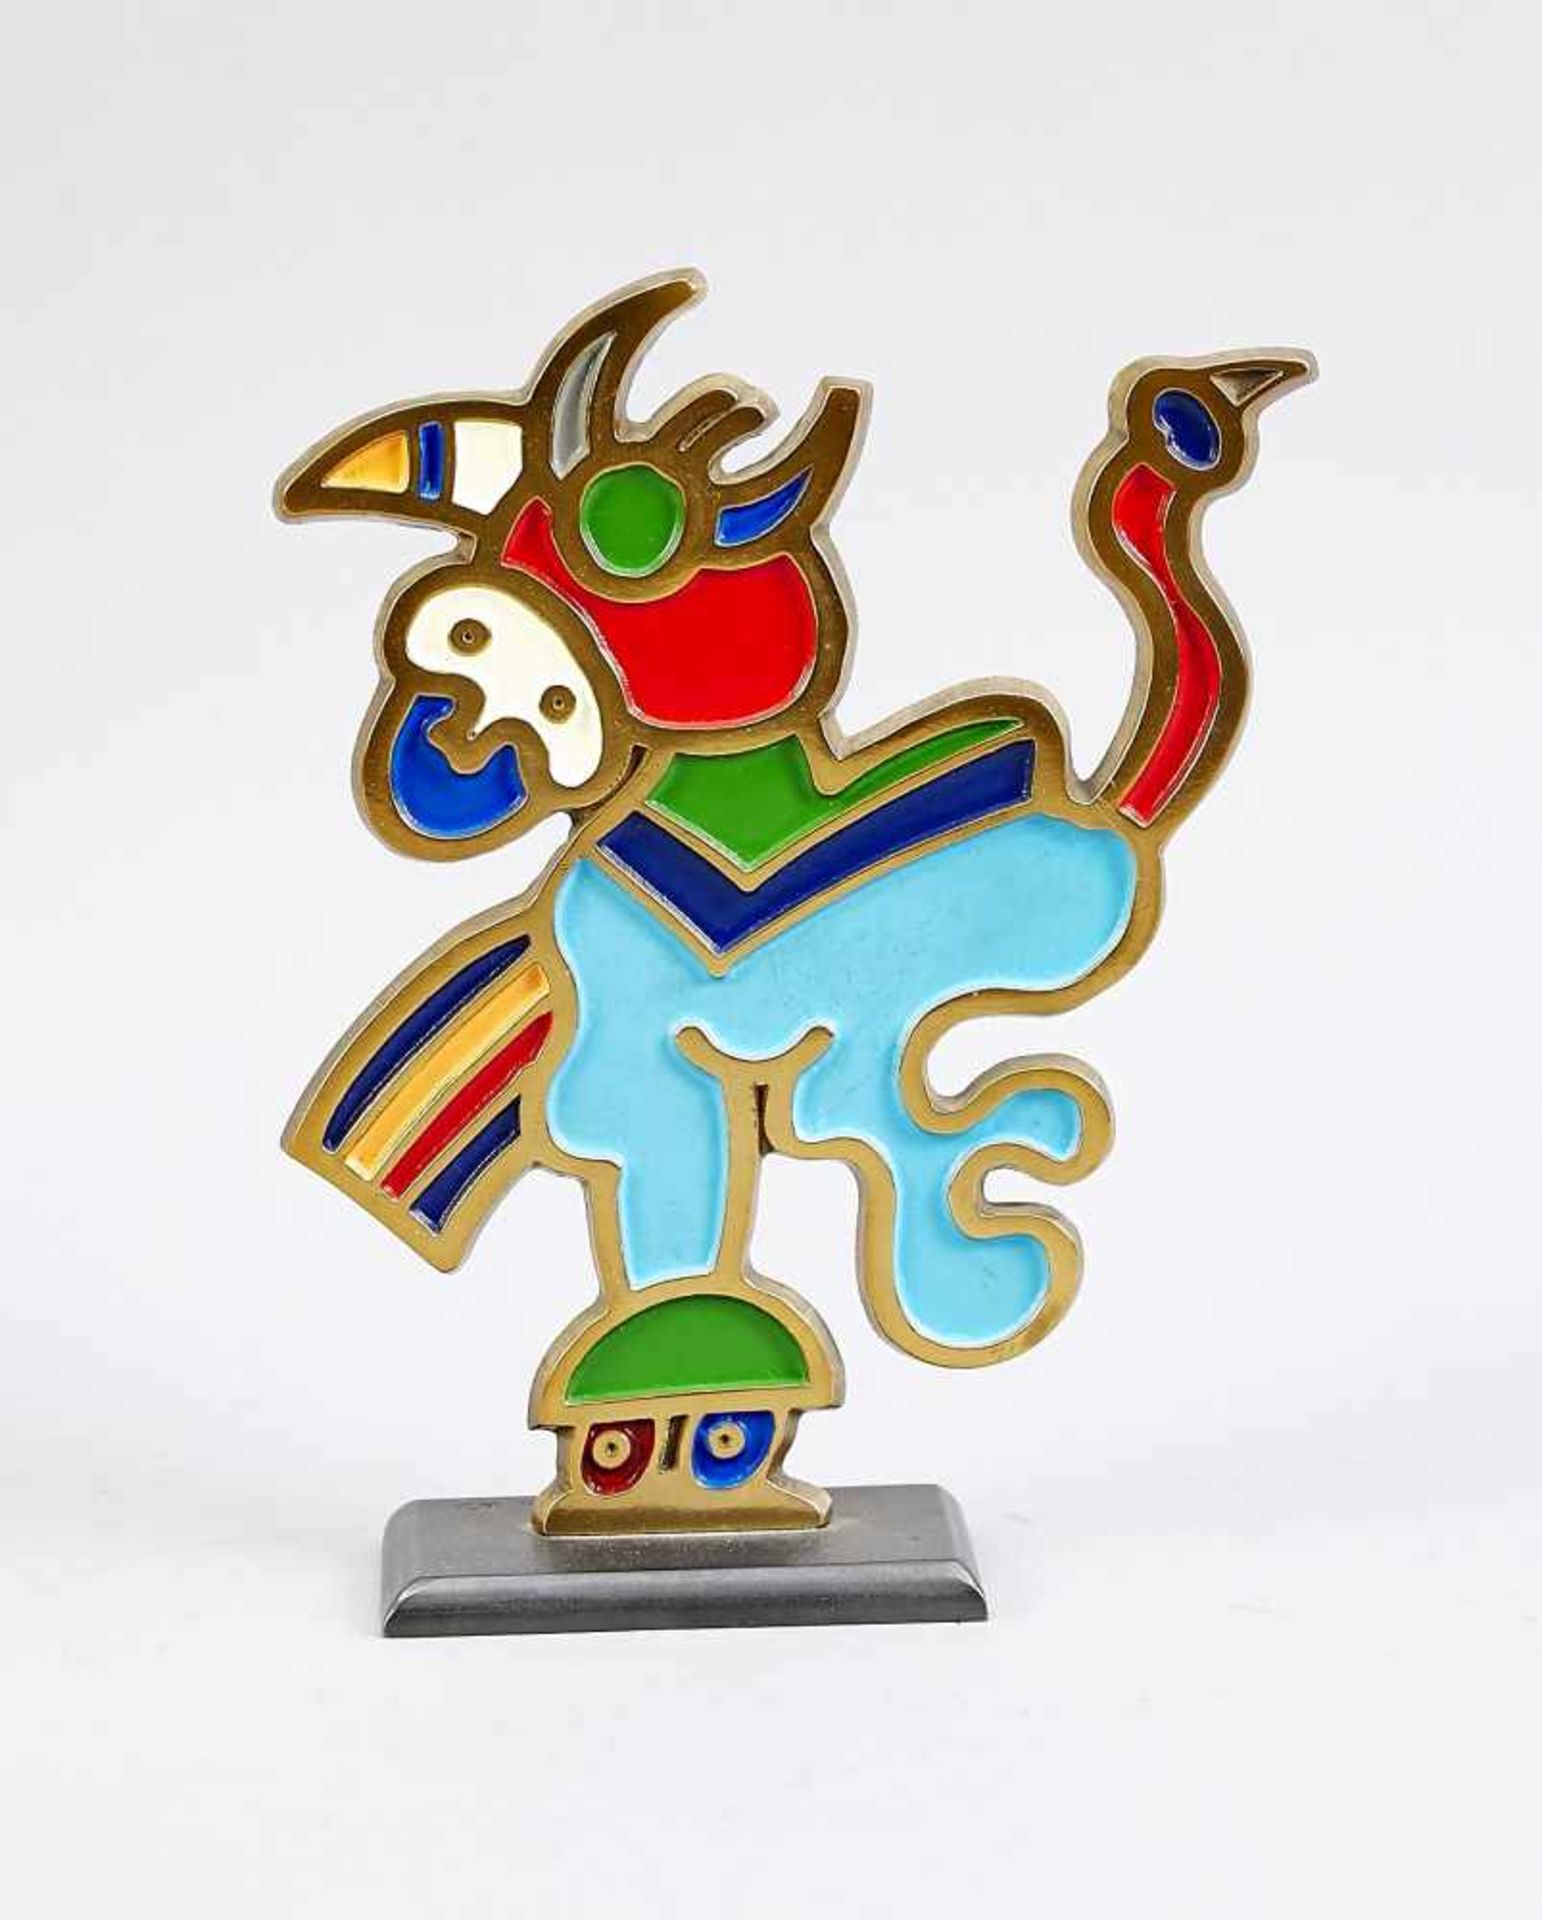 Otmar Alt (* 1940), abstract sculpture, flat brass relief with colored fields, signed inthe stand